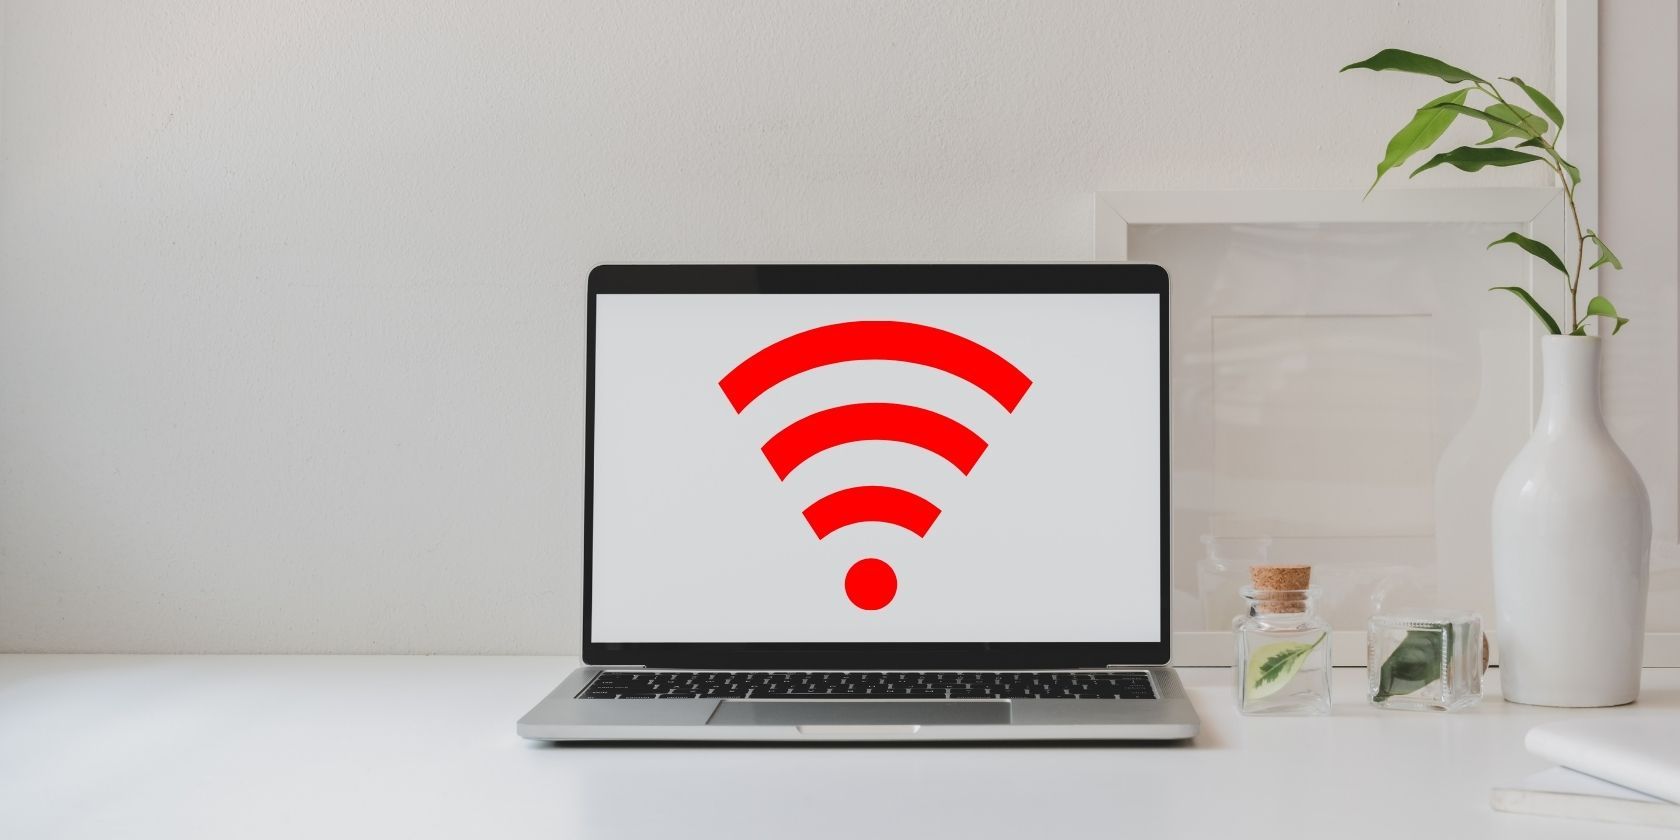 Laptop with no wi-fi signal sign